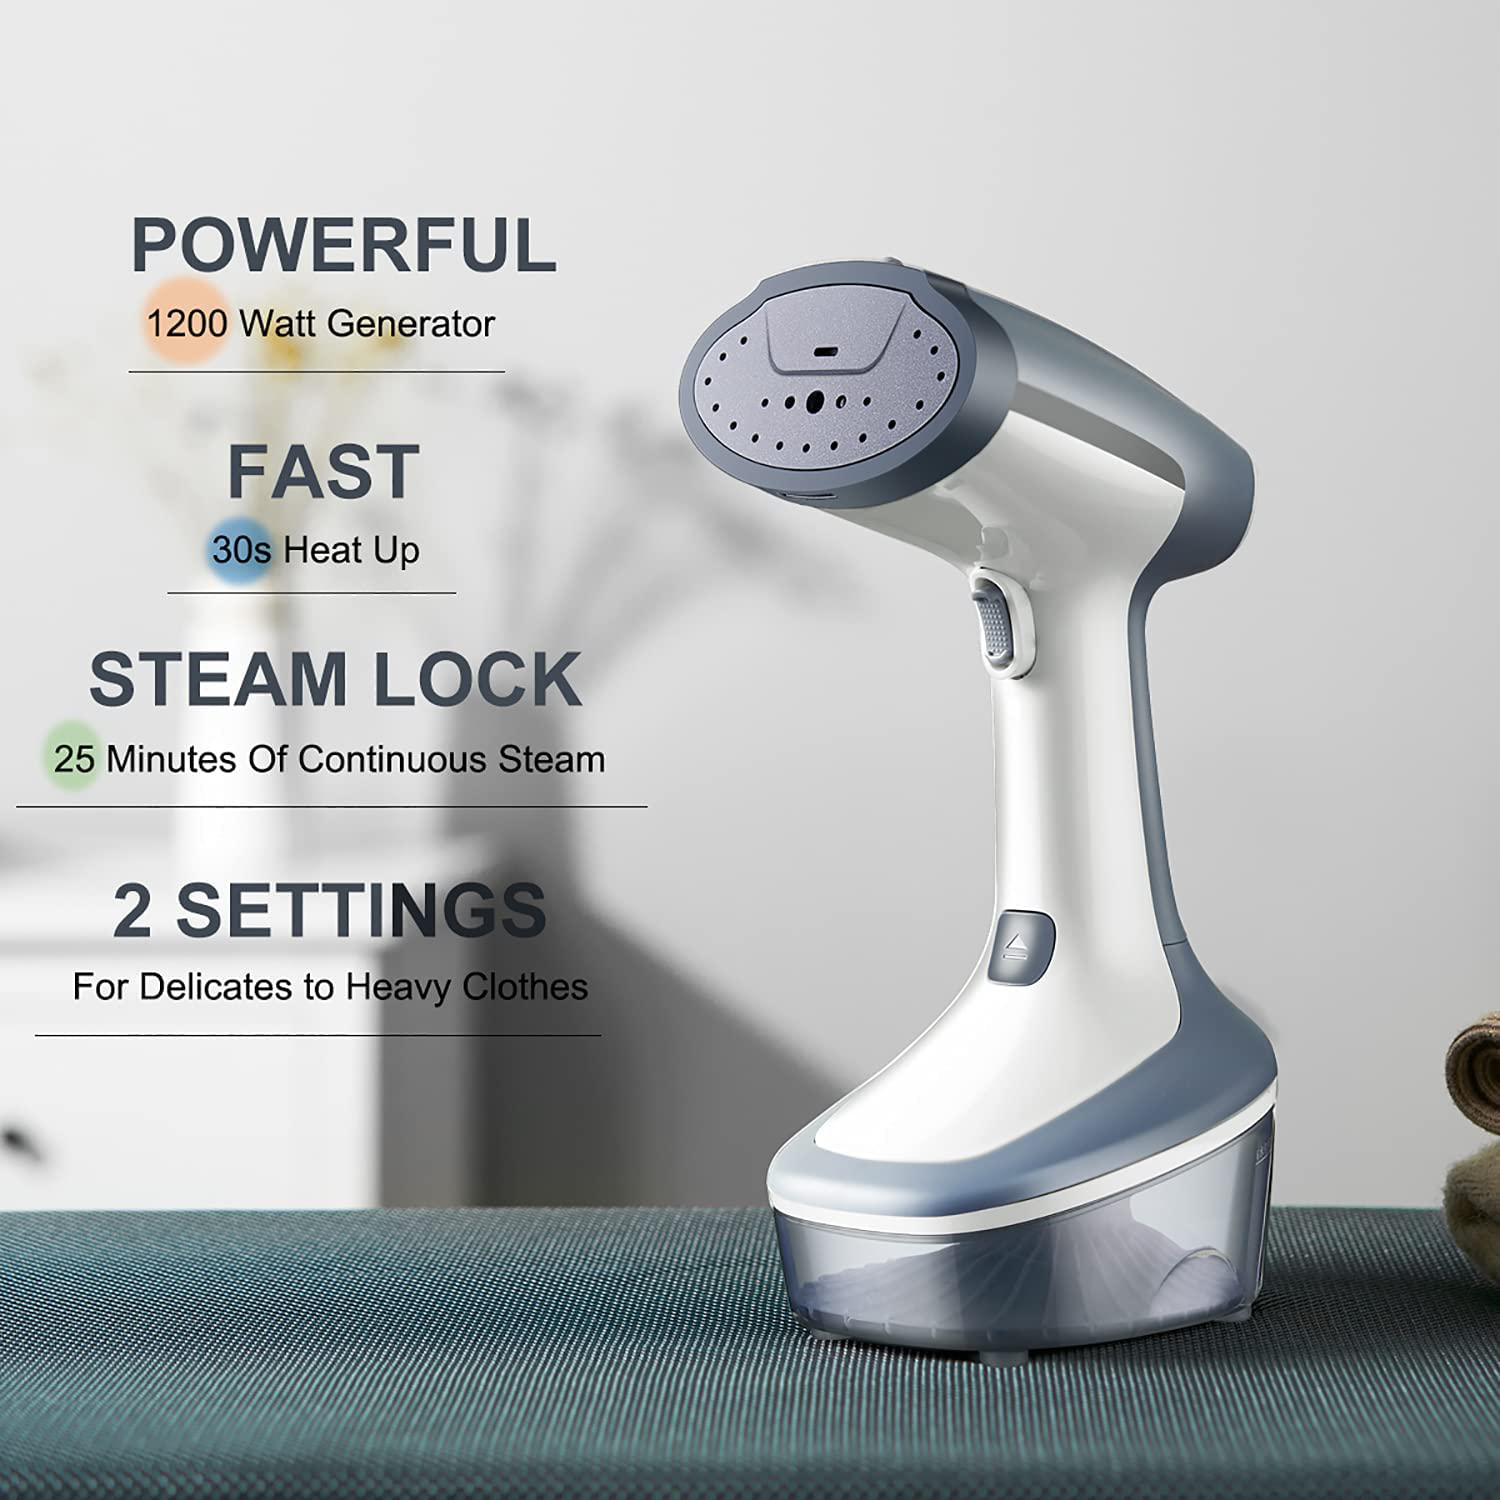 YIKA Steamer for Clothes, 300ml Hand-Held Clothes Steamer with Ceramic Iron Panel, 1200W Garment & Fabric Wrinkle Remover, 25 mins Continuous Steam, 30s Heat Up Portable Travel Clothing Steamer